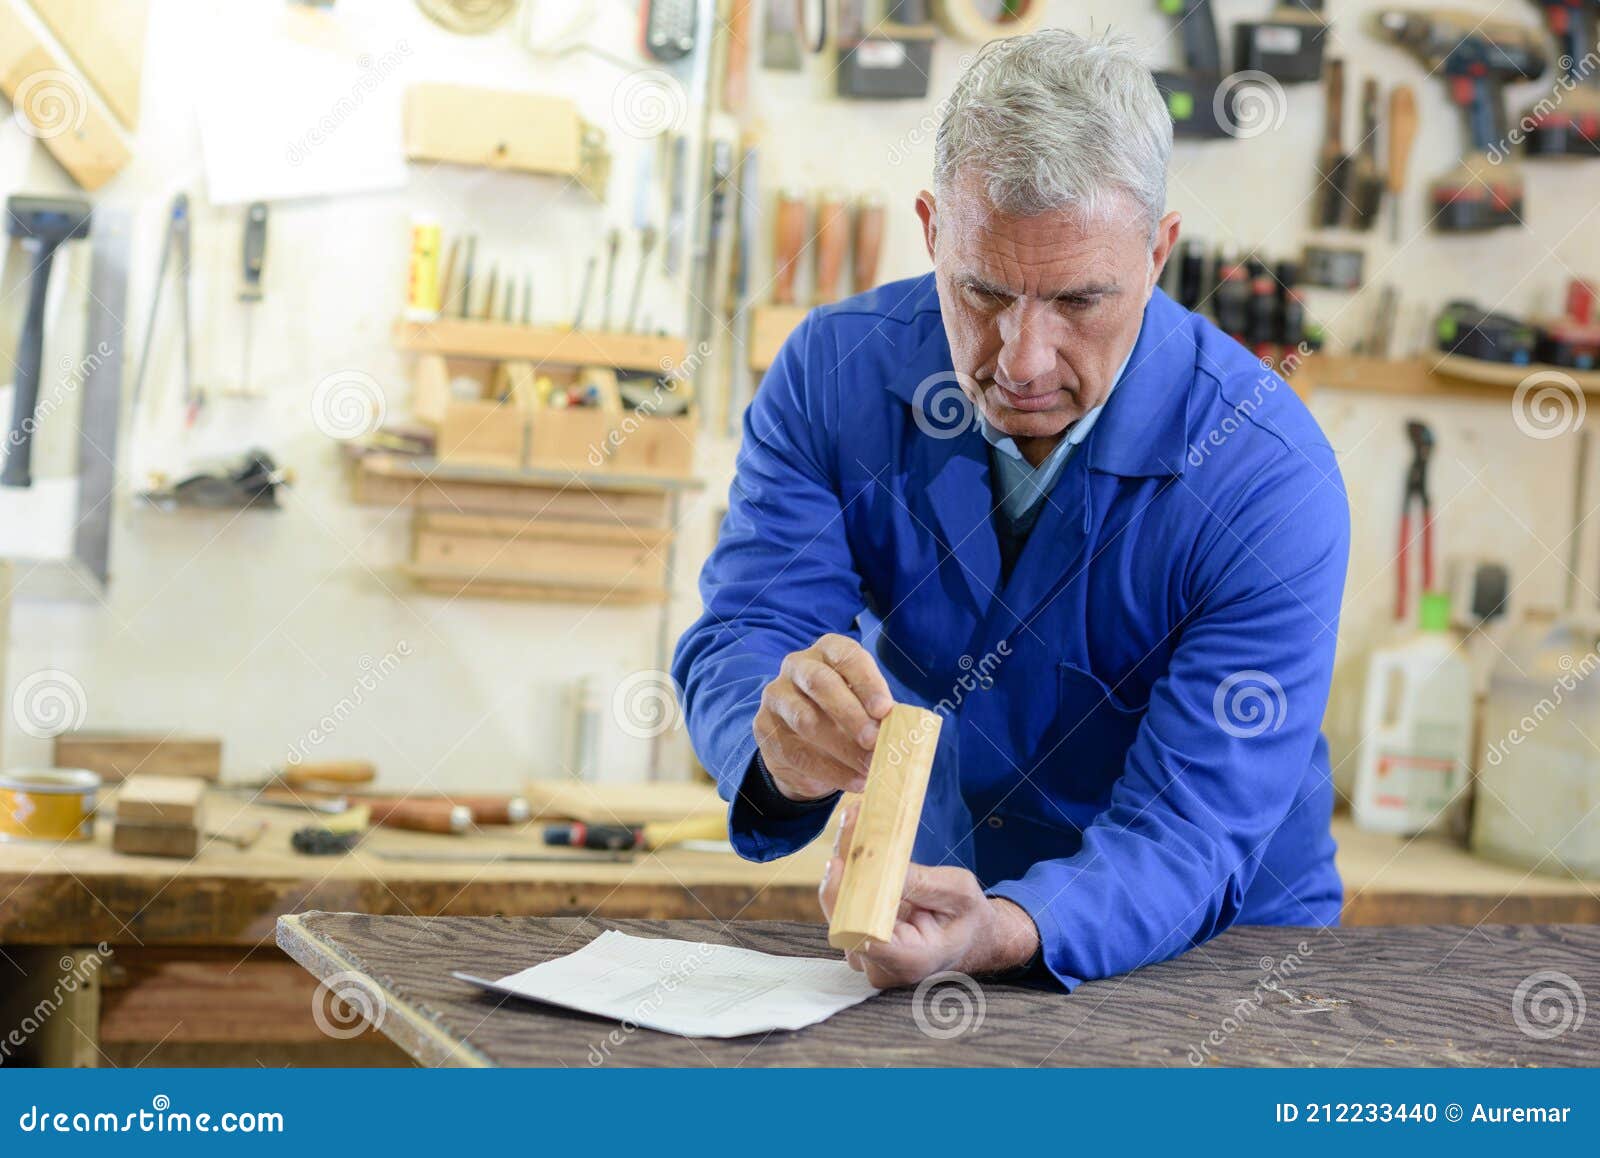 17 154 Carpenter Shop Photos Free Royalty Free Stock Photos From Dreamstime